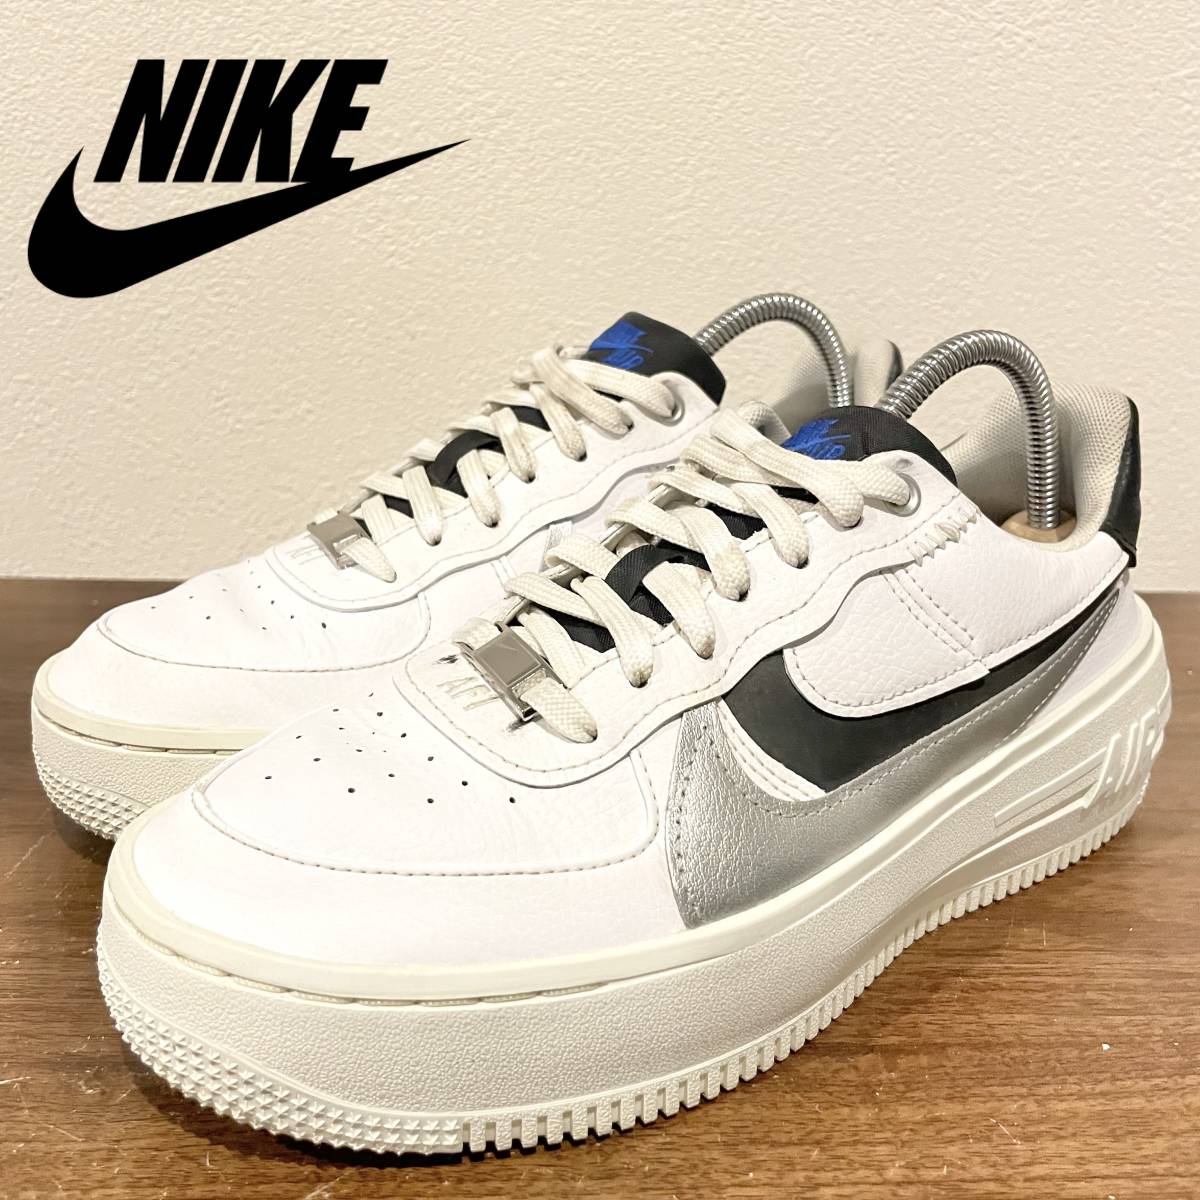 NIKE AIR FORCE 1 PLT AF ORM LV8 WHITE ナイキ エア フォース ワン